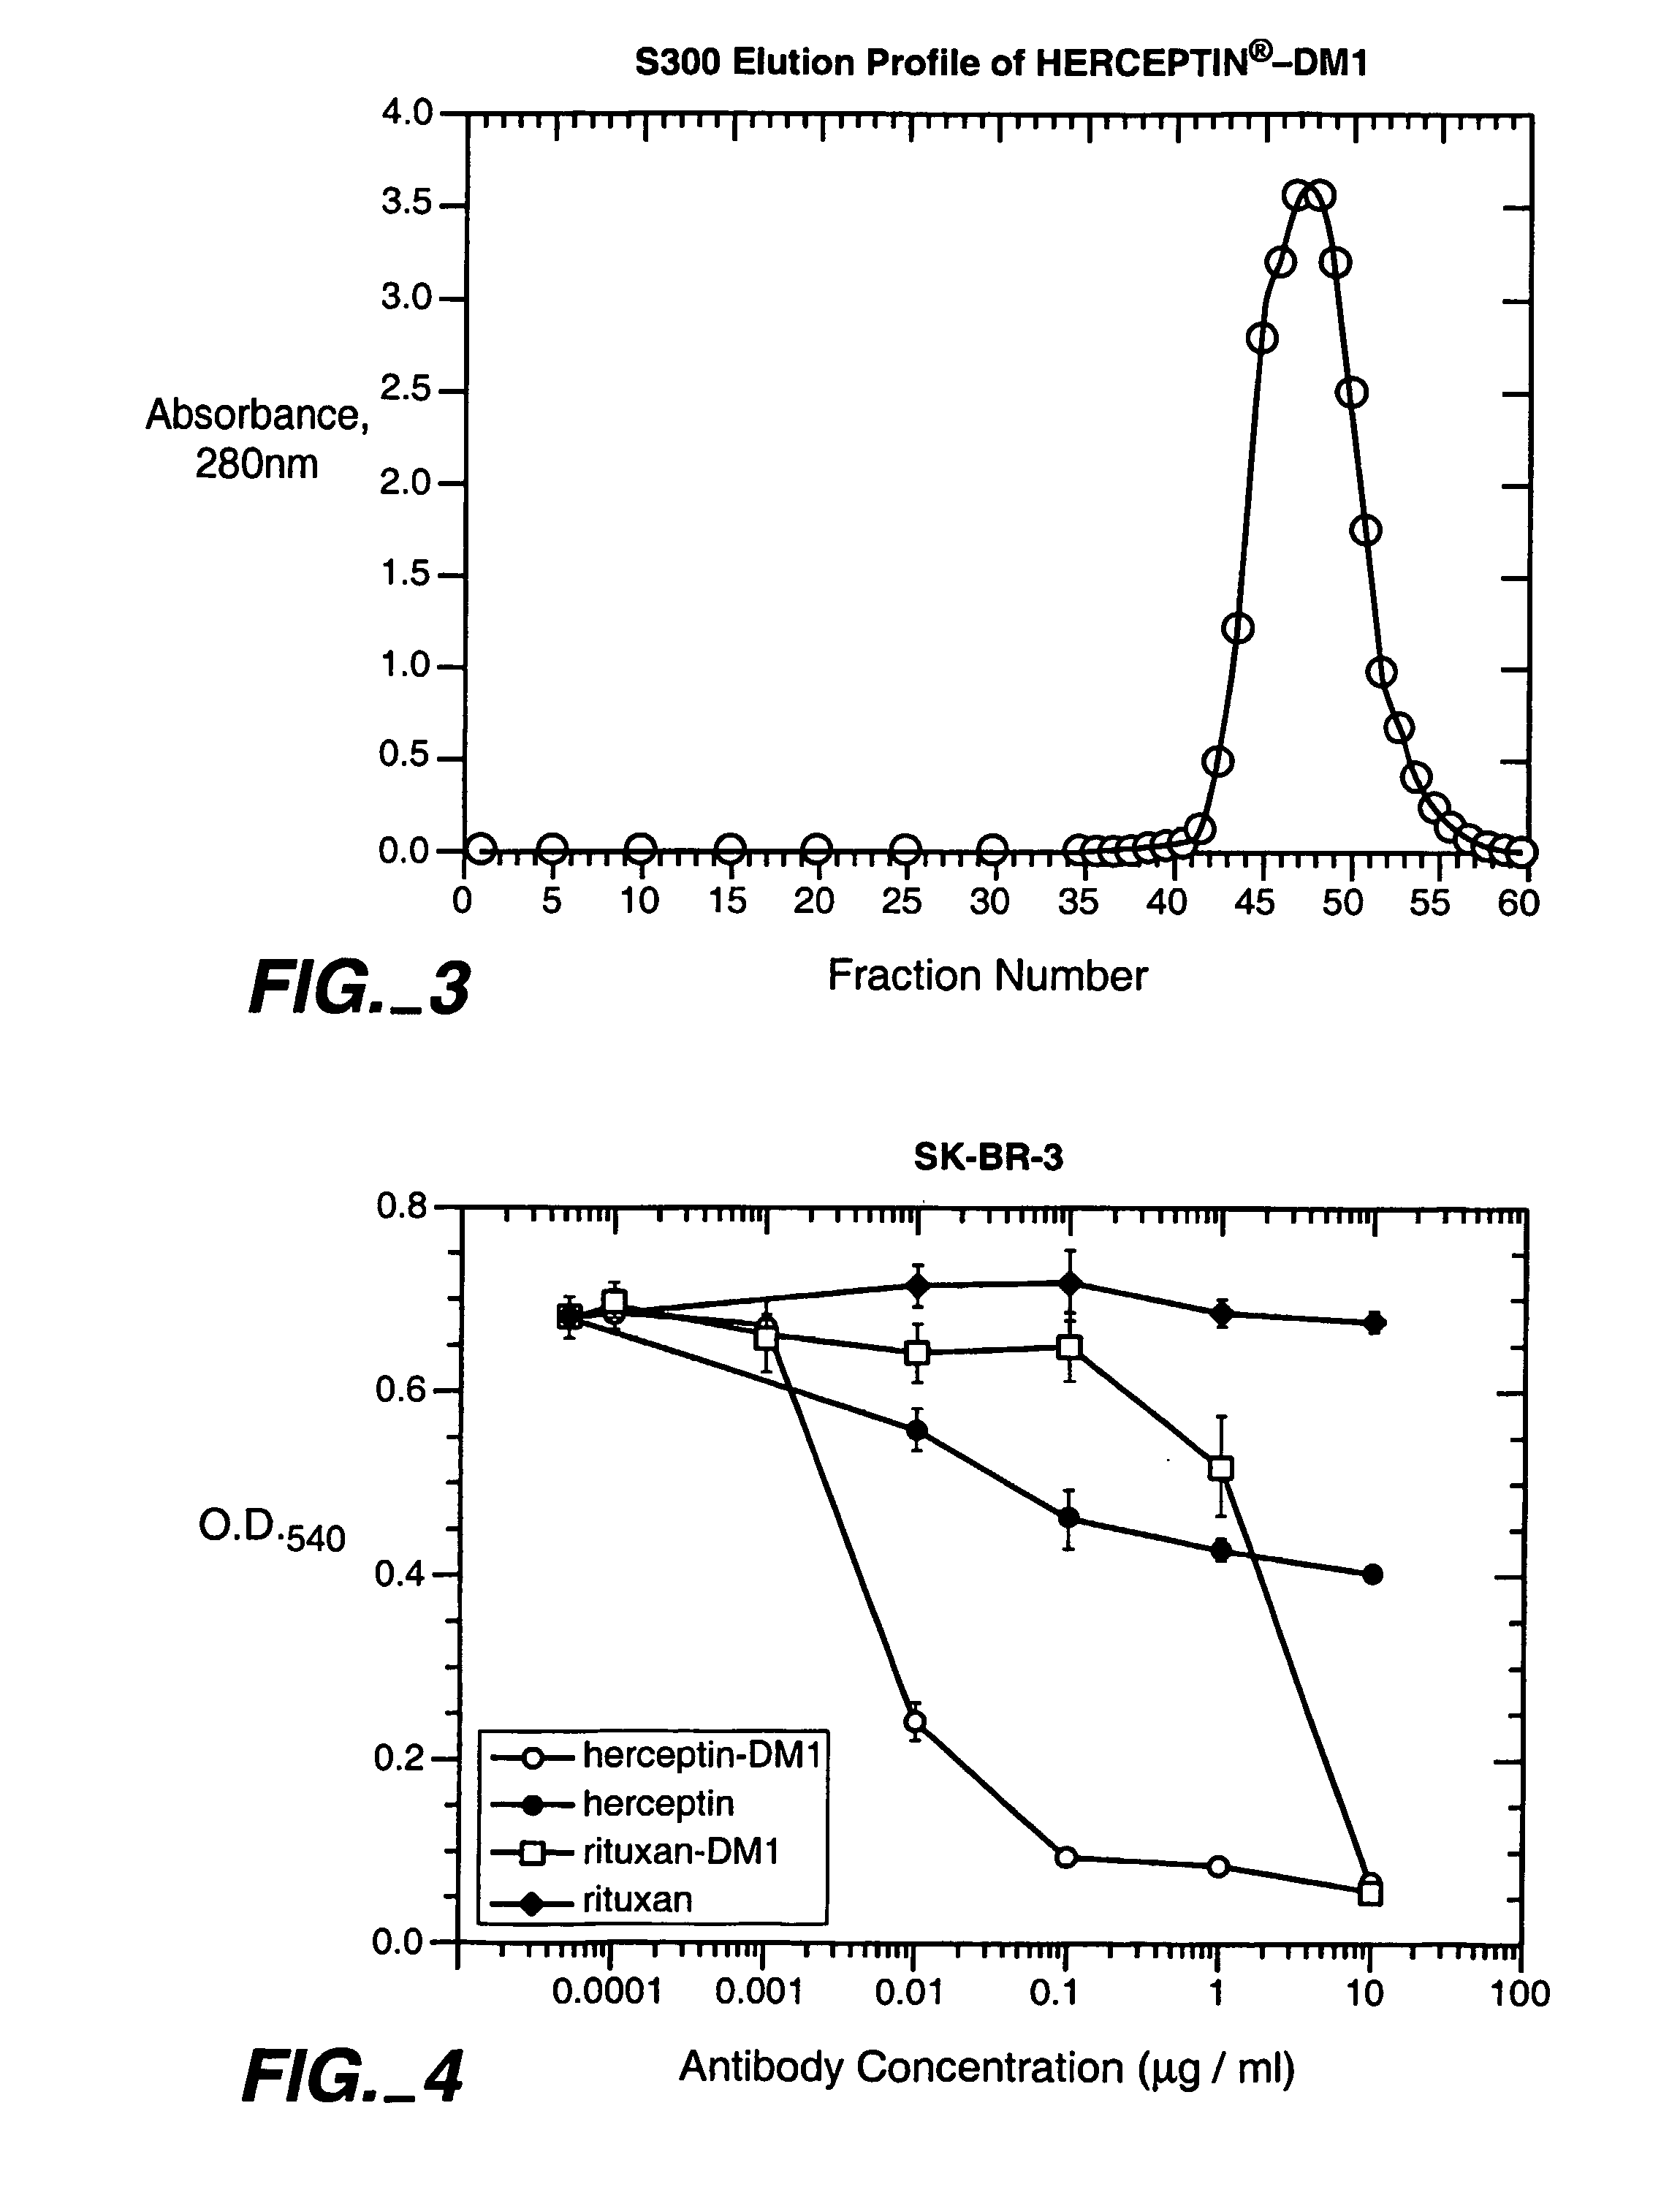 Methods for the identification of polypeptide antigens associated with disorders involving aberrant cell proliferation and compositions useful for the treatment of such disorders